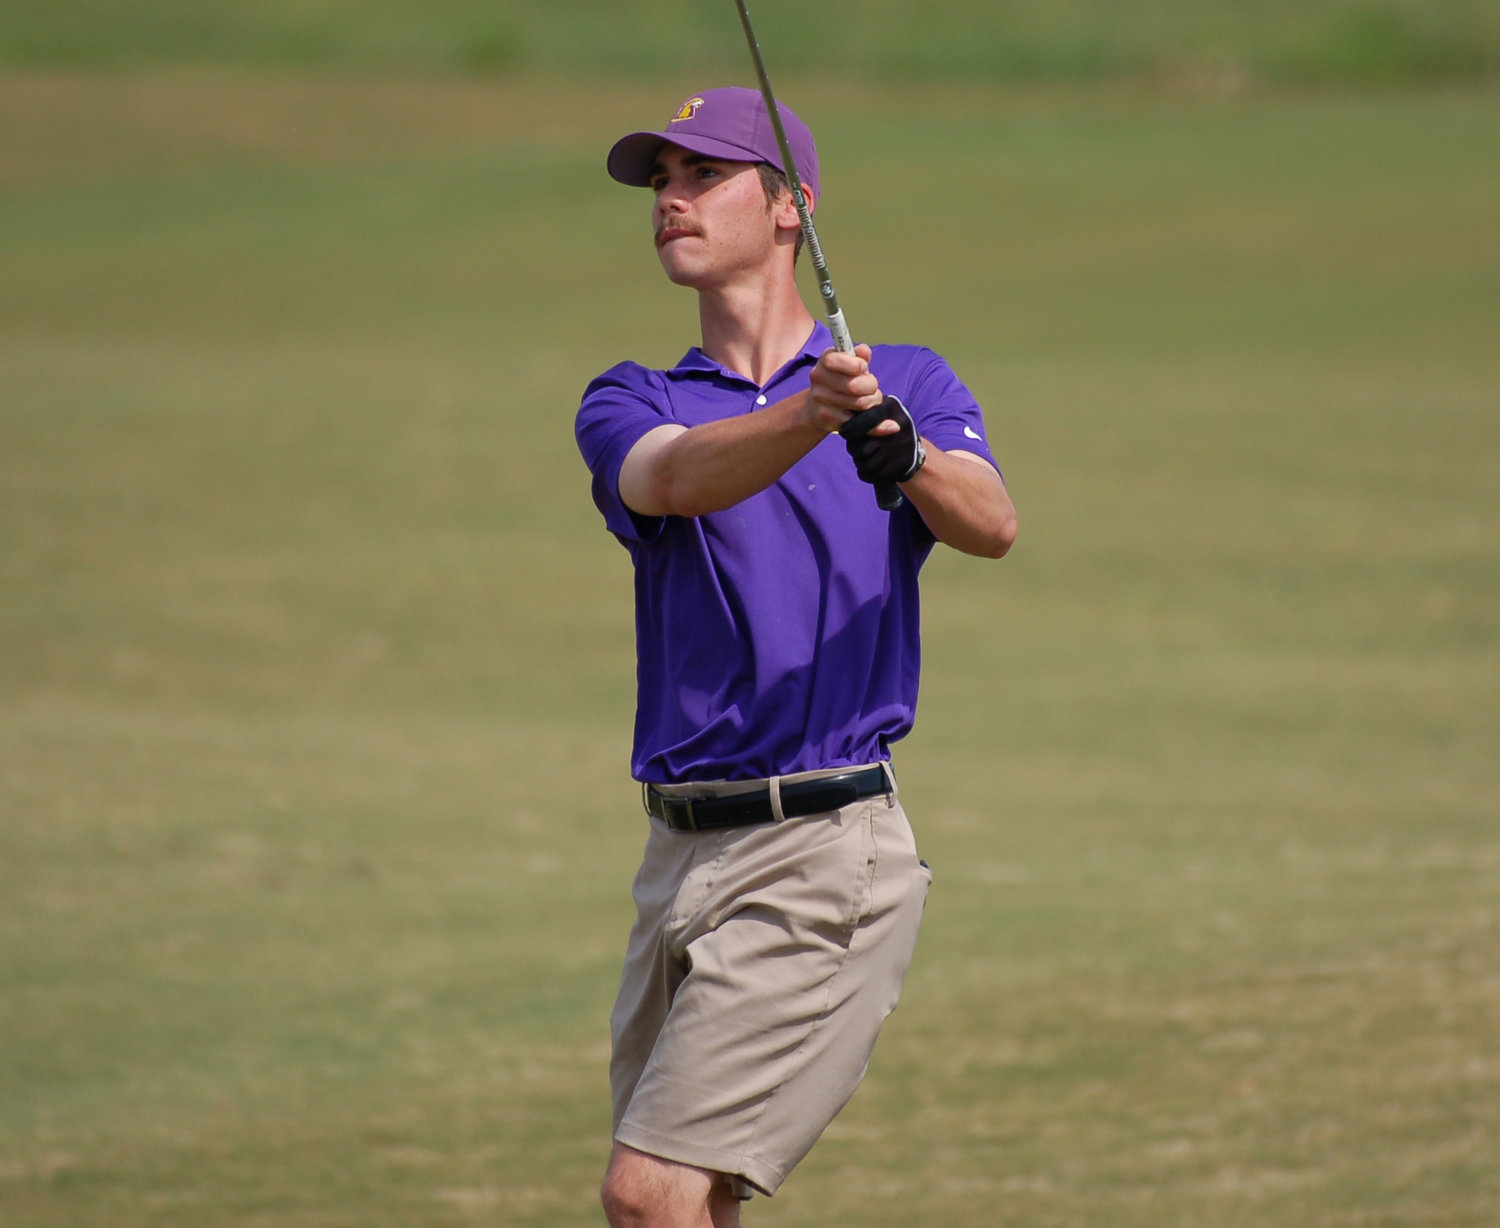 For TTU, it was All-OVC Team and OVC All-Newcomer Team honoree Mark McDearman finishing at the top of the team's leaderboard in a tie for sixth among the field of 55.